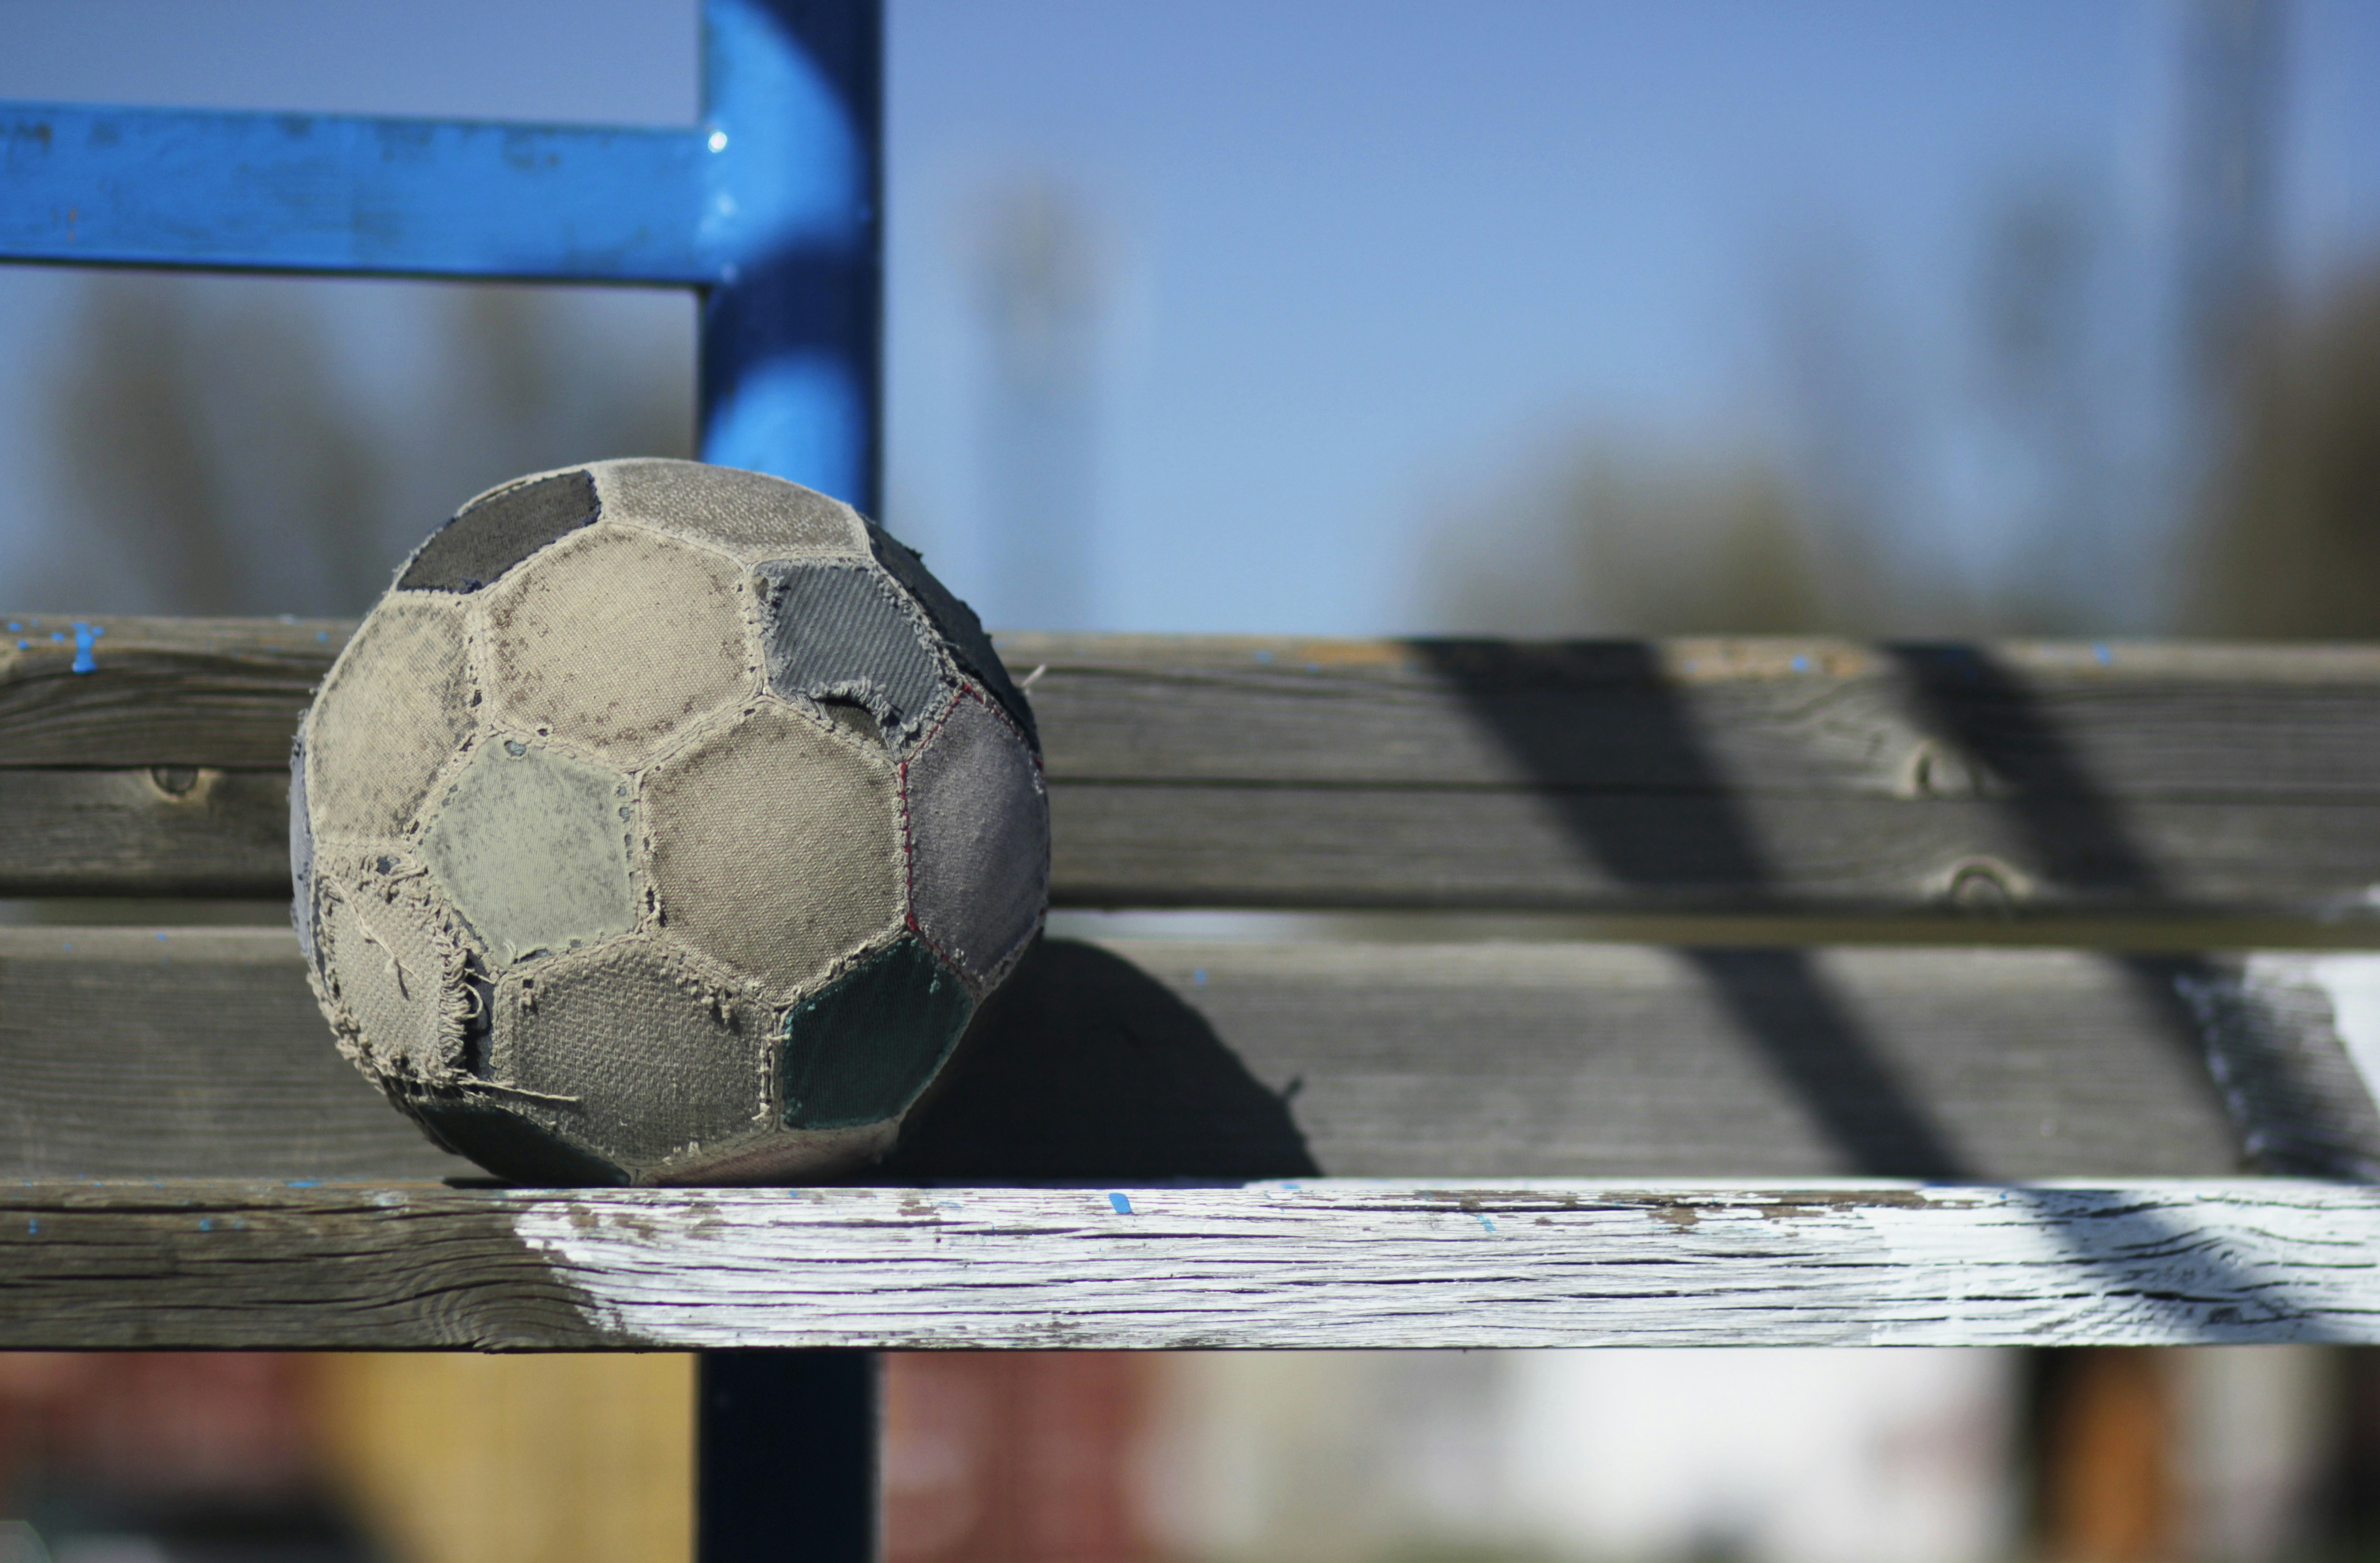 A worn-out football on a wooden bench.